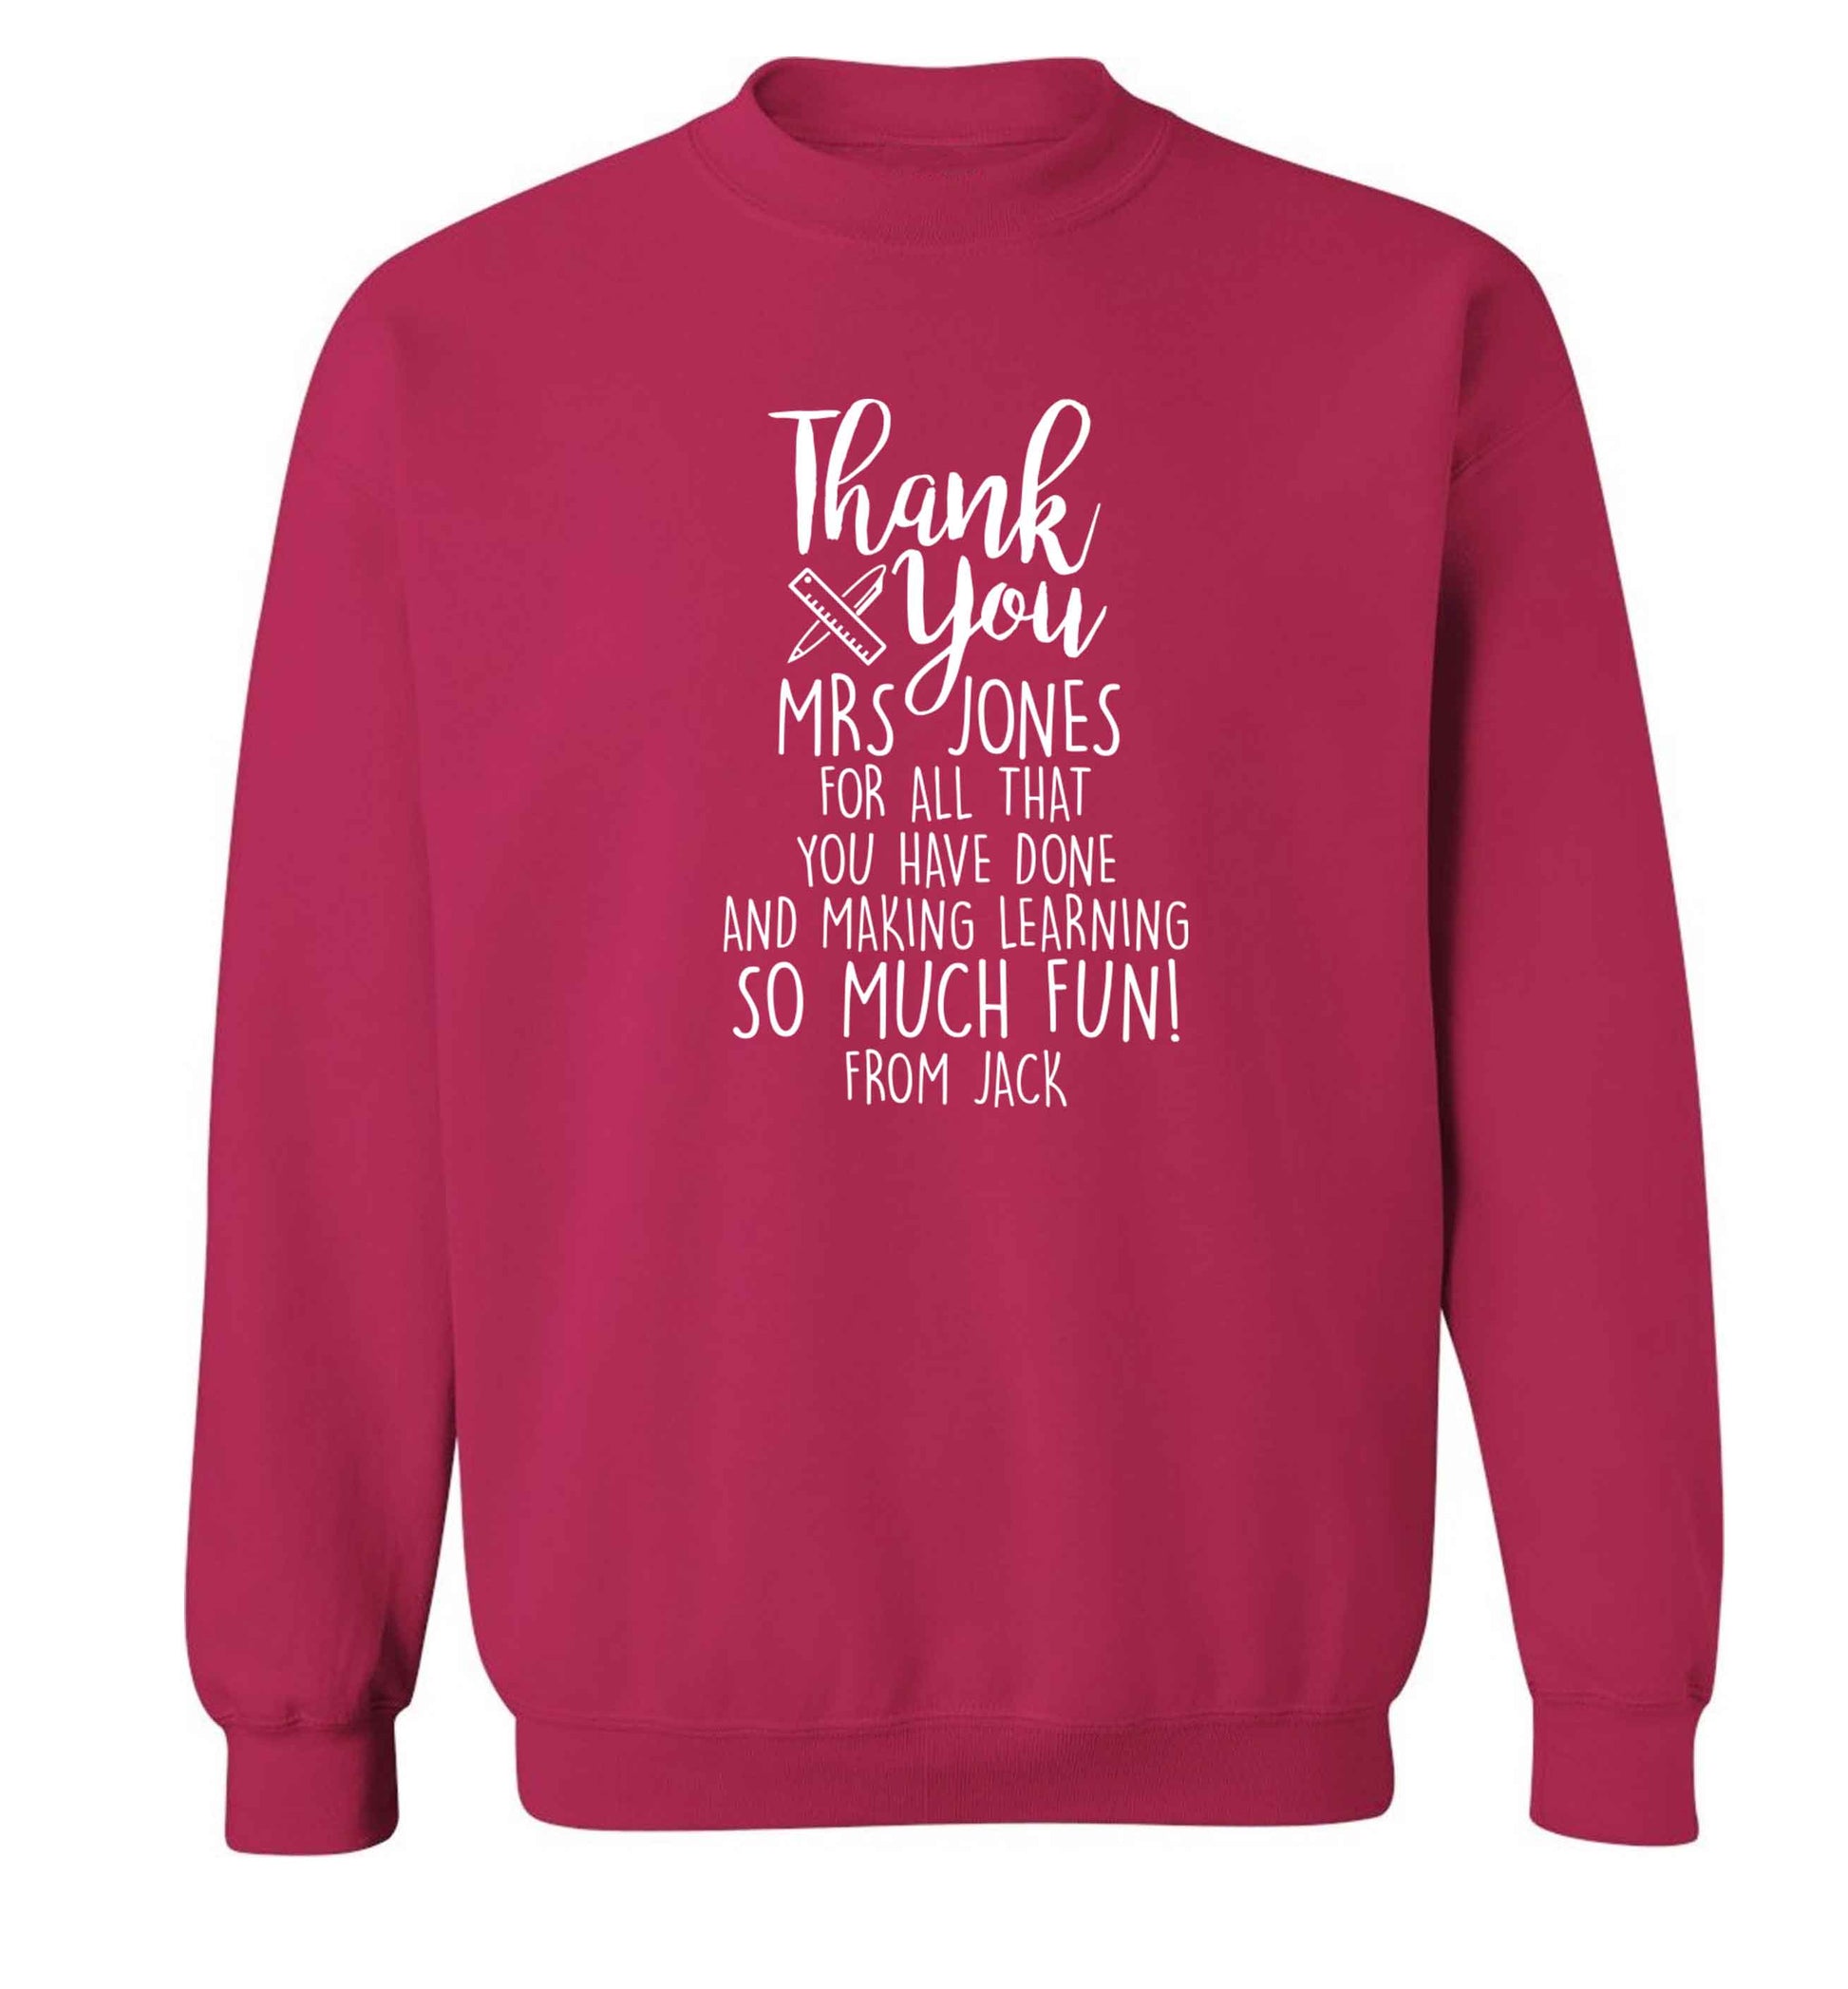 Personalised thank you Mrs for all that you've done and making learning so much fun! Adult's unisex pink Sweater 2XL